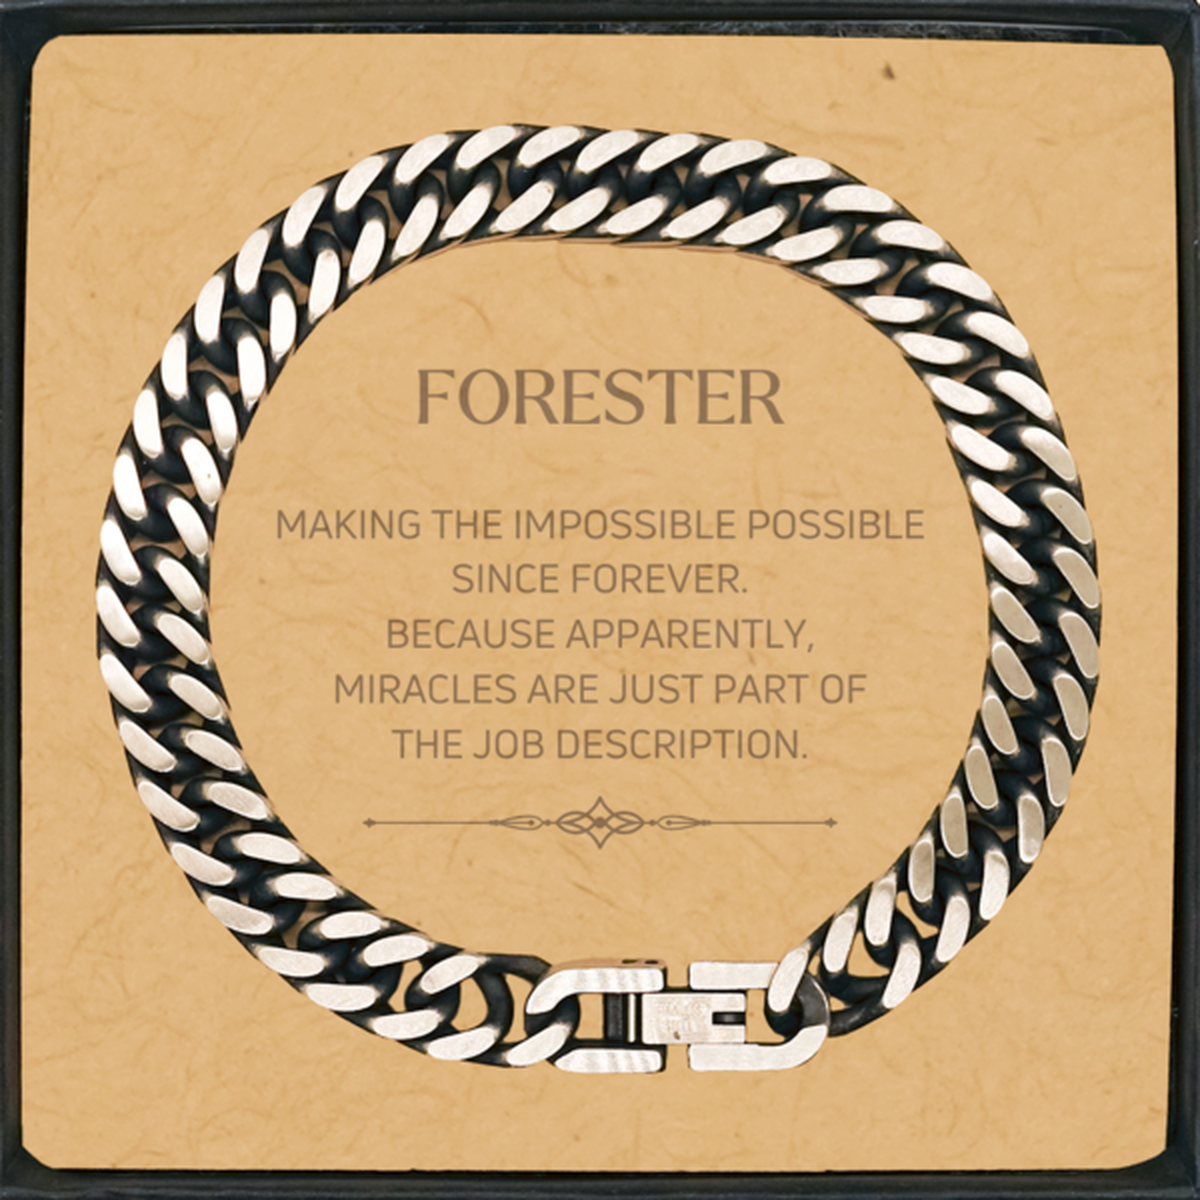 Funny Forester Gifts, Miracles are just part of the job description, Inspirational Birthday Cuban Link Chain Bracelet For Forester, Men, Women, Coworkers, Friends, Boss